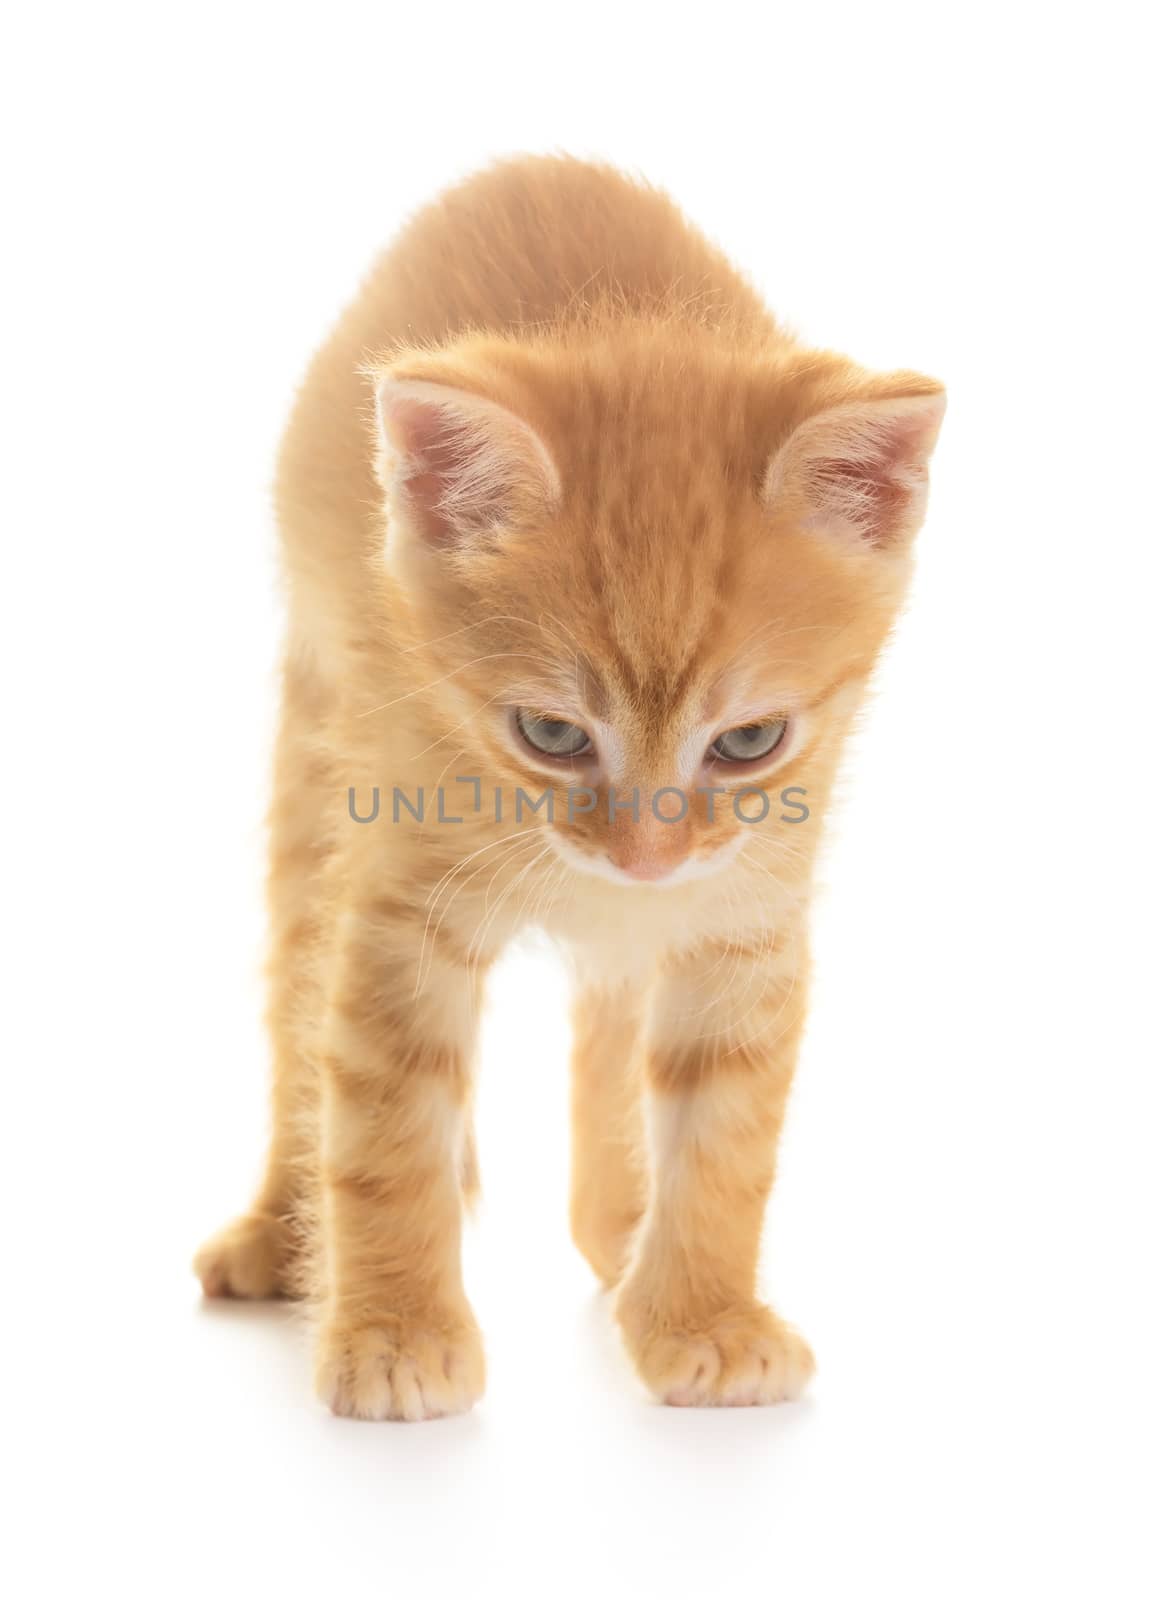 Anggry red kitten isolated on white background